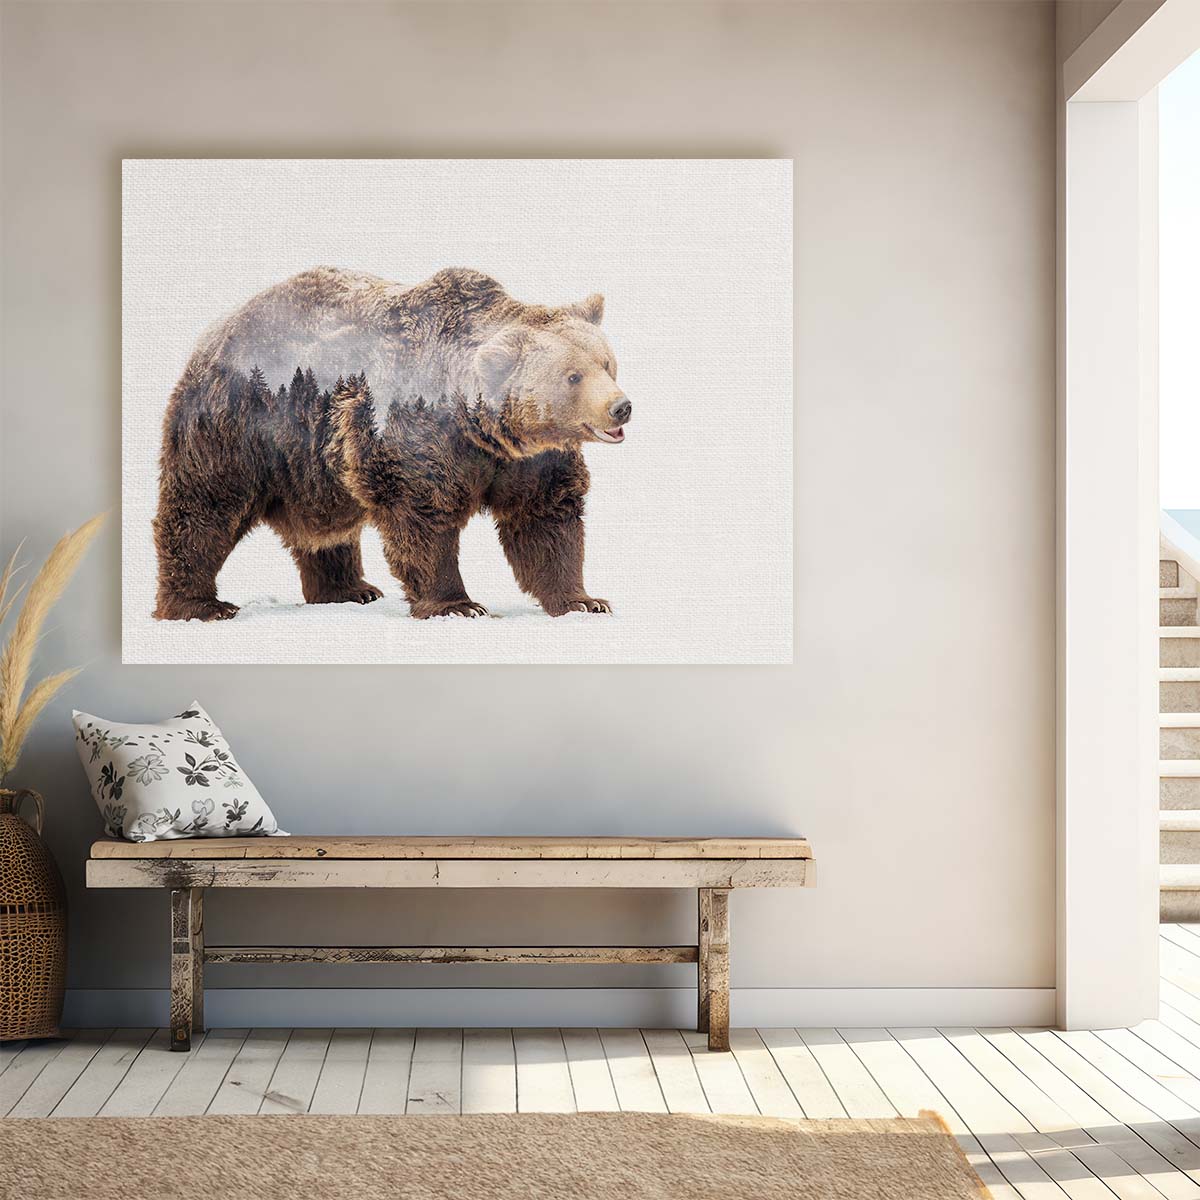 Foggy Forest Bear Double Exposure Wall Art by Luxuriance Designs. Made in USA.